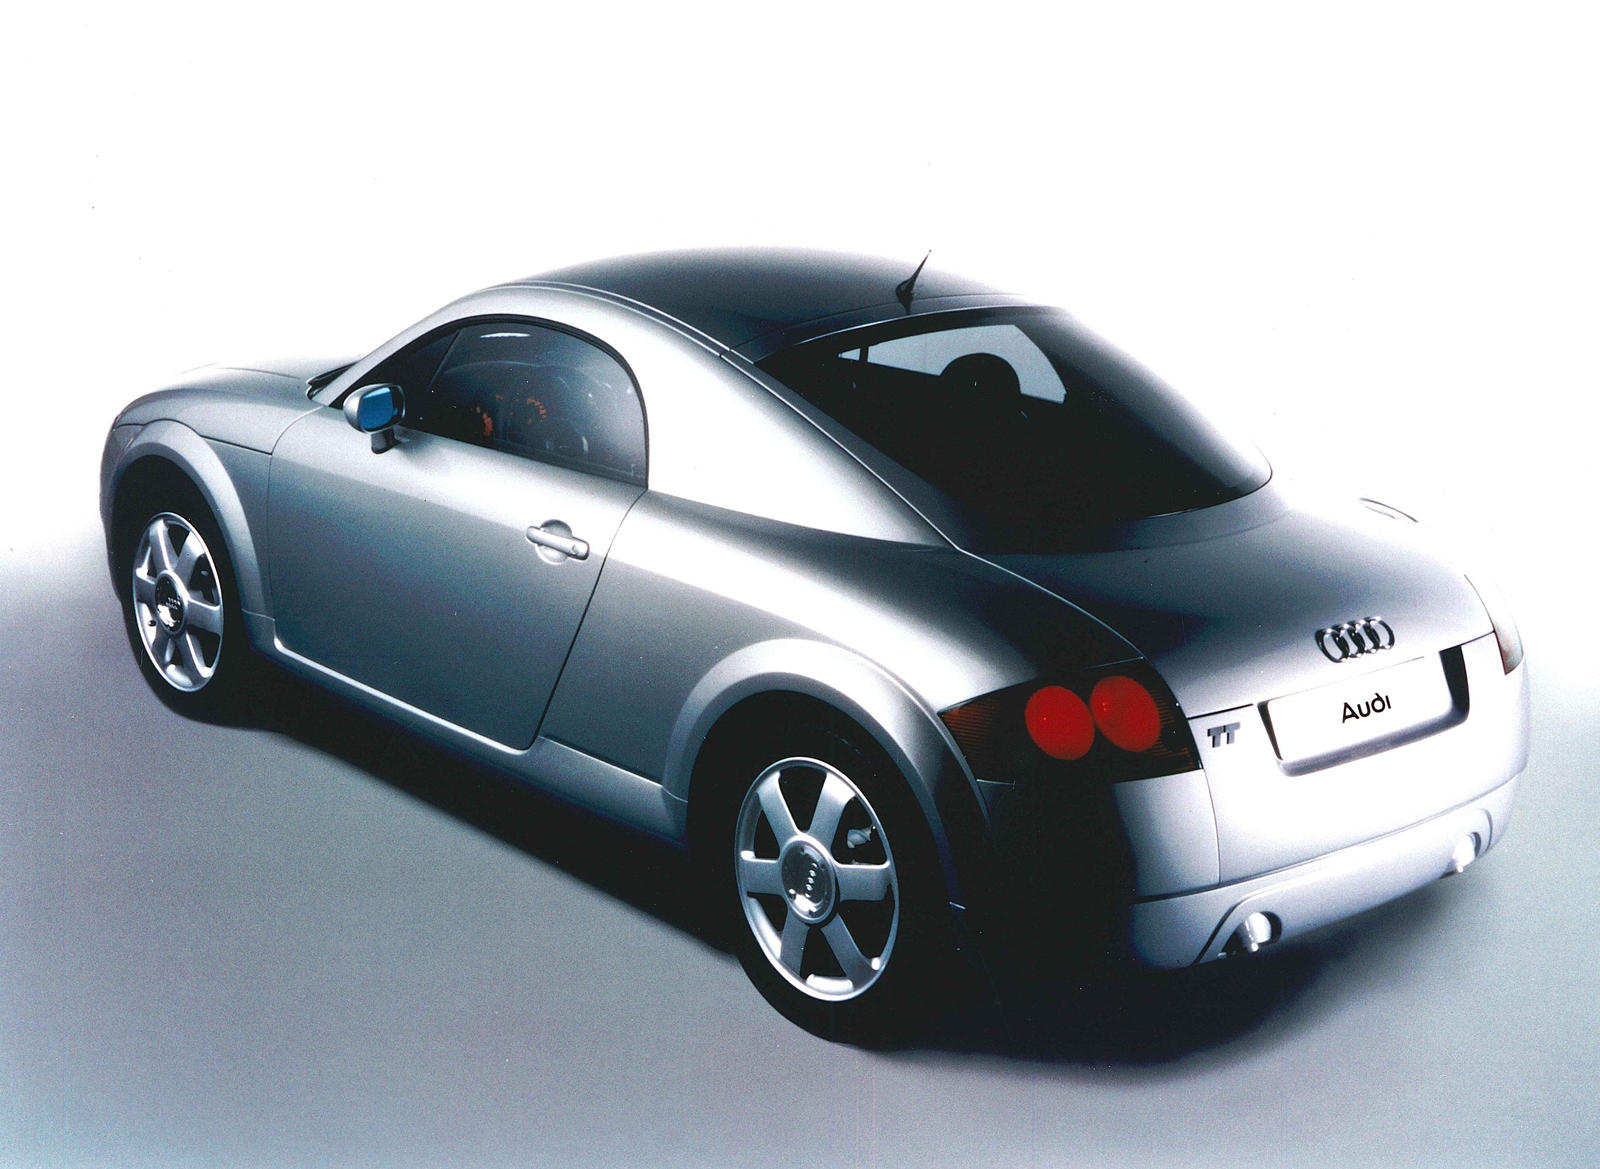 A Brief History Of The Audi TT